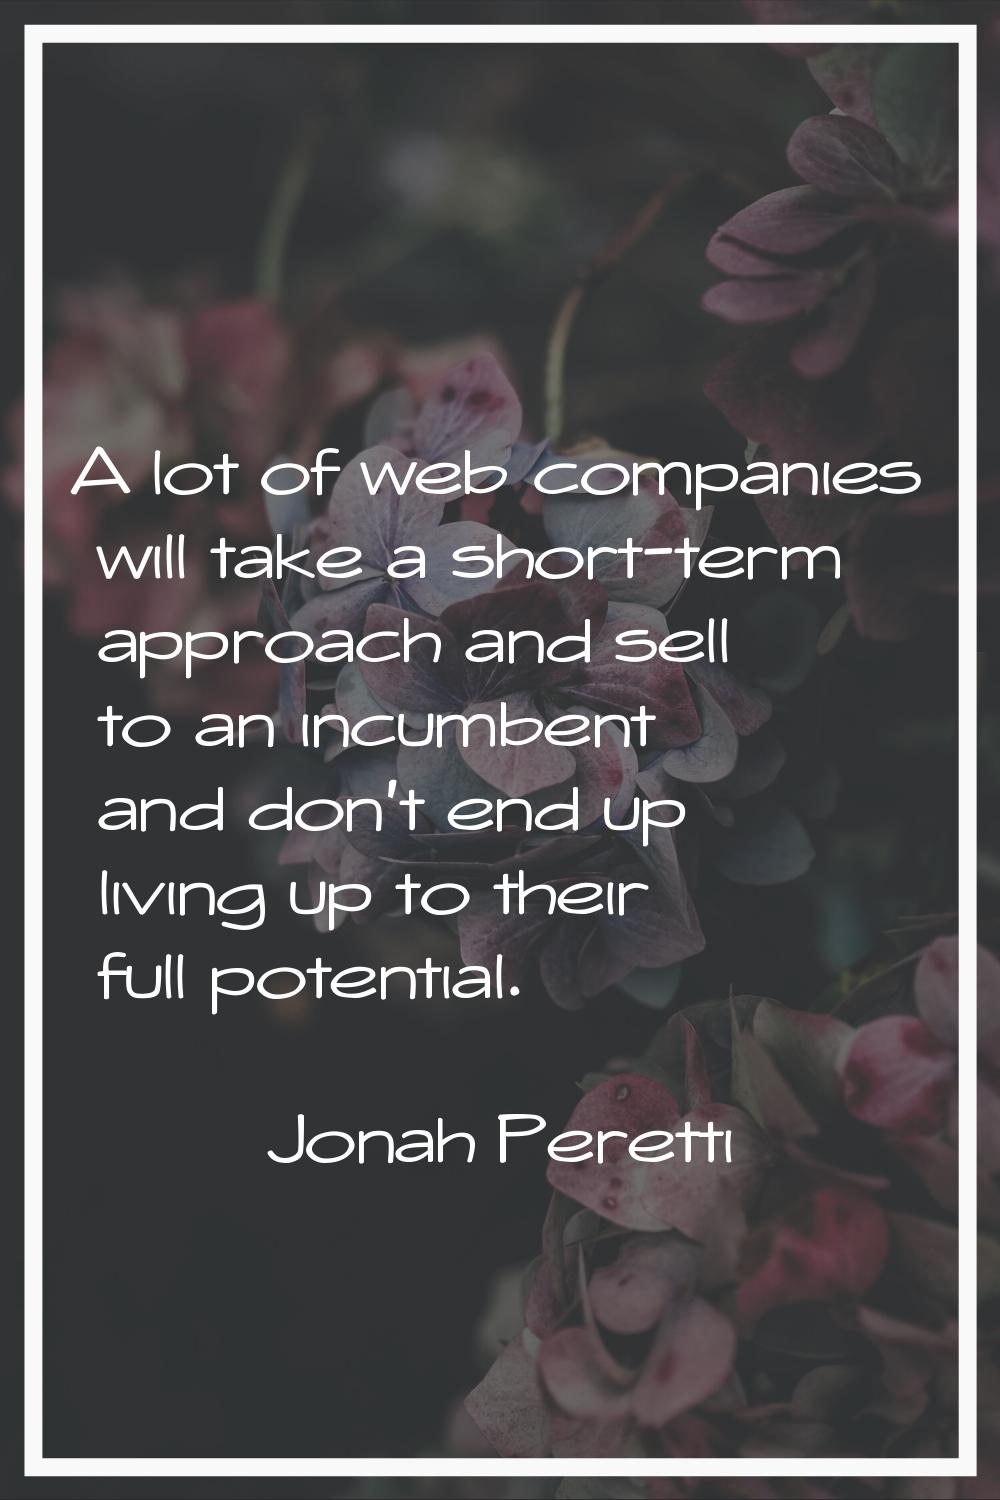 A lot of web companies will take a short-term approach and sell to an incumbent and don't end up li